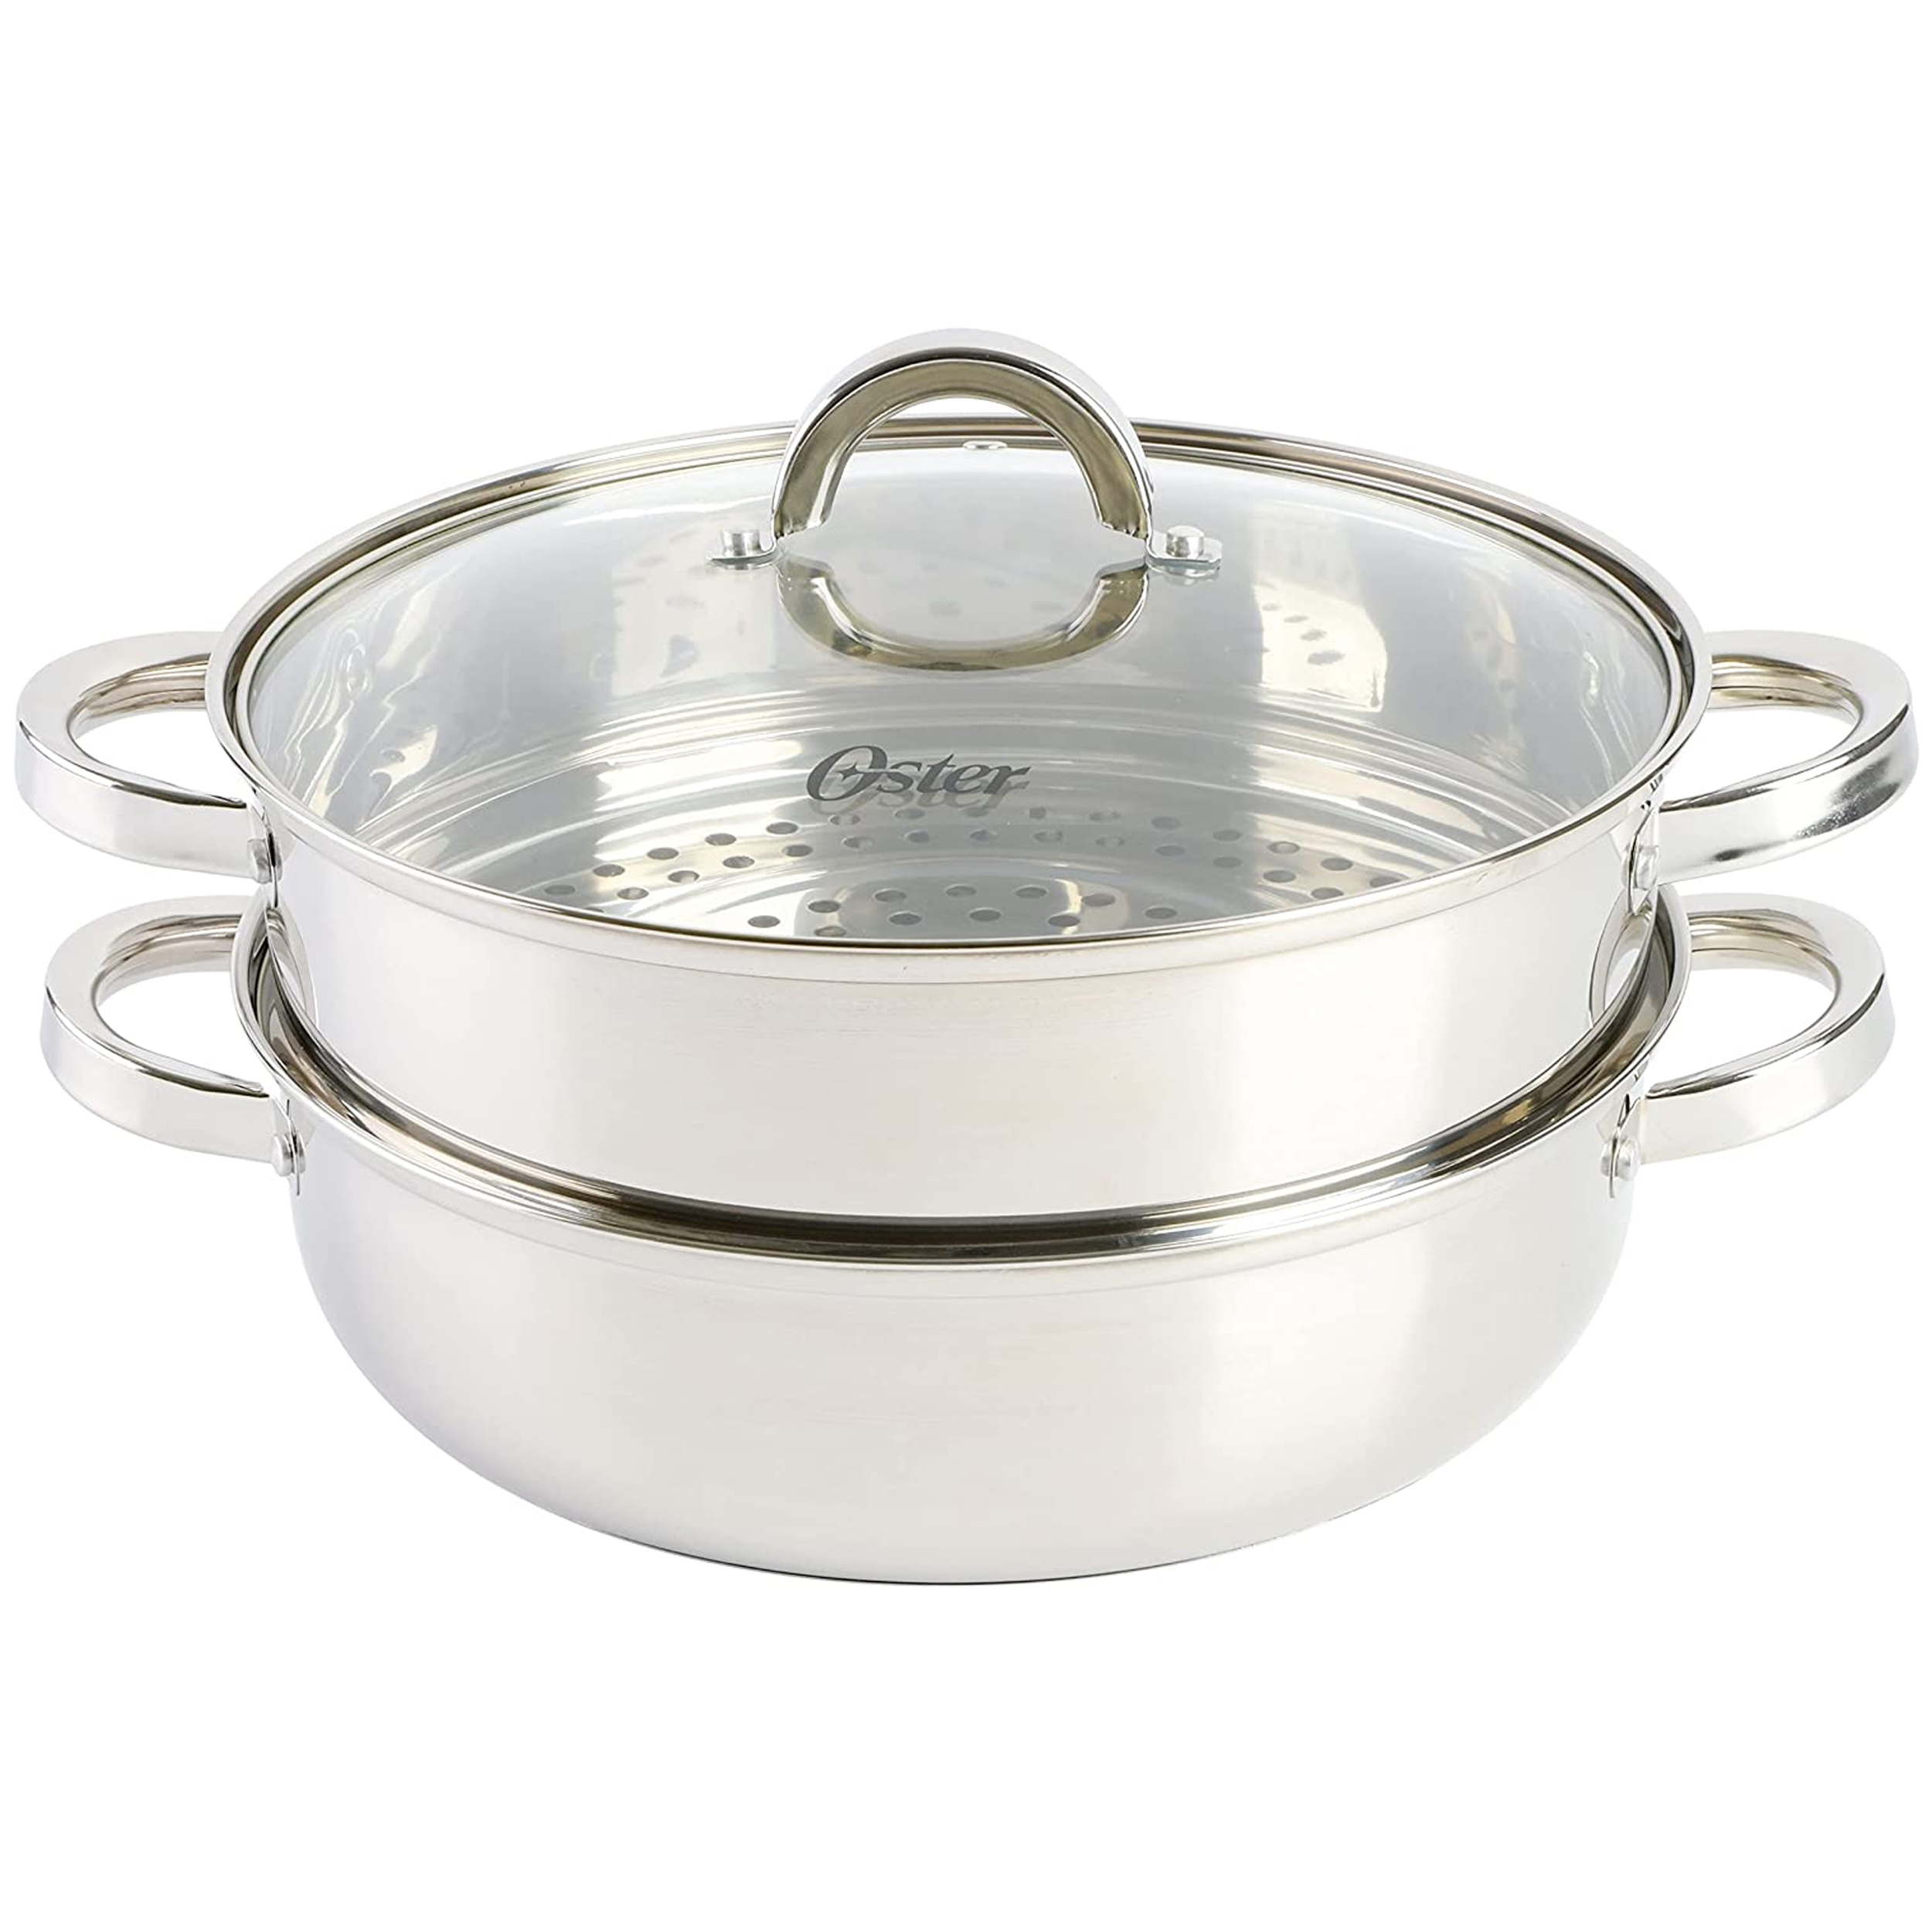 Oster Sangerfield 5 Piece 4 Quart Stainless Steel Dutch Oven with Lid and 3-Section Dividers